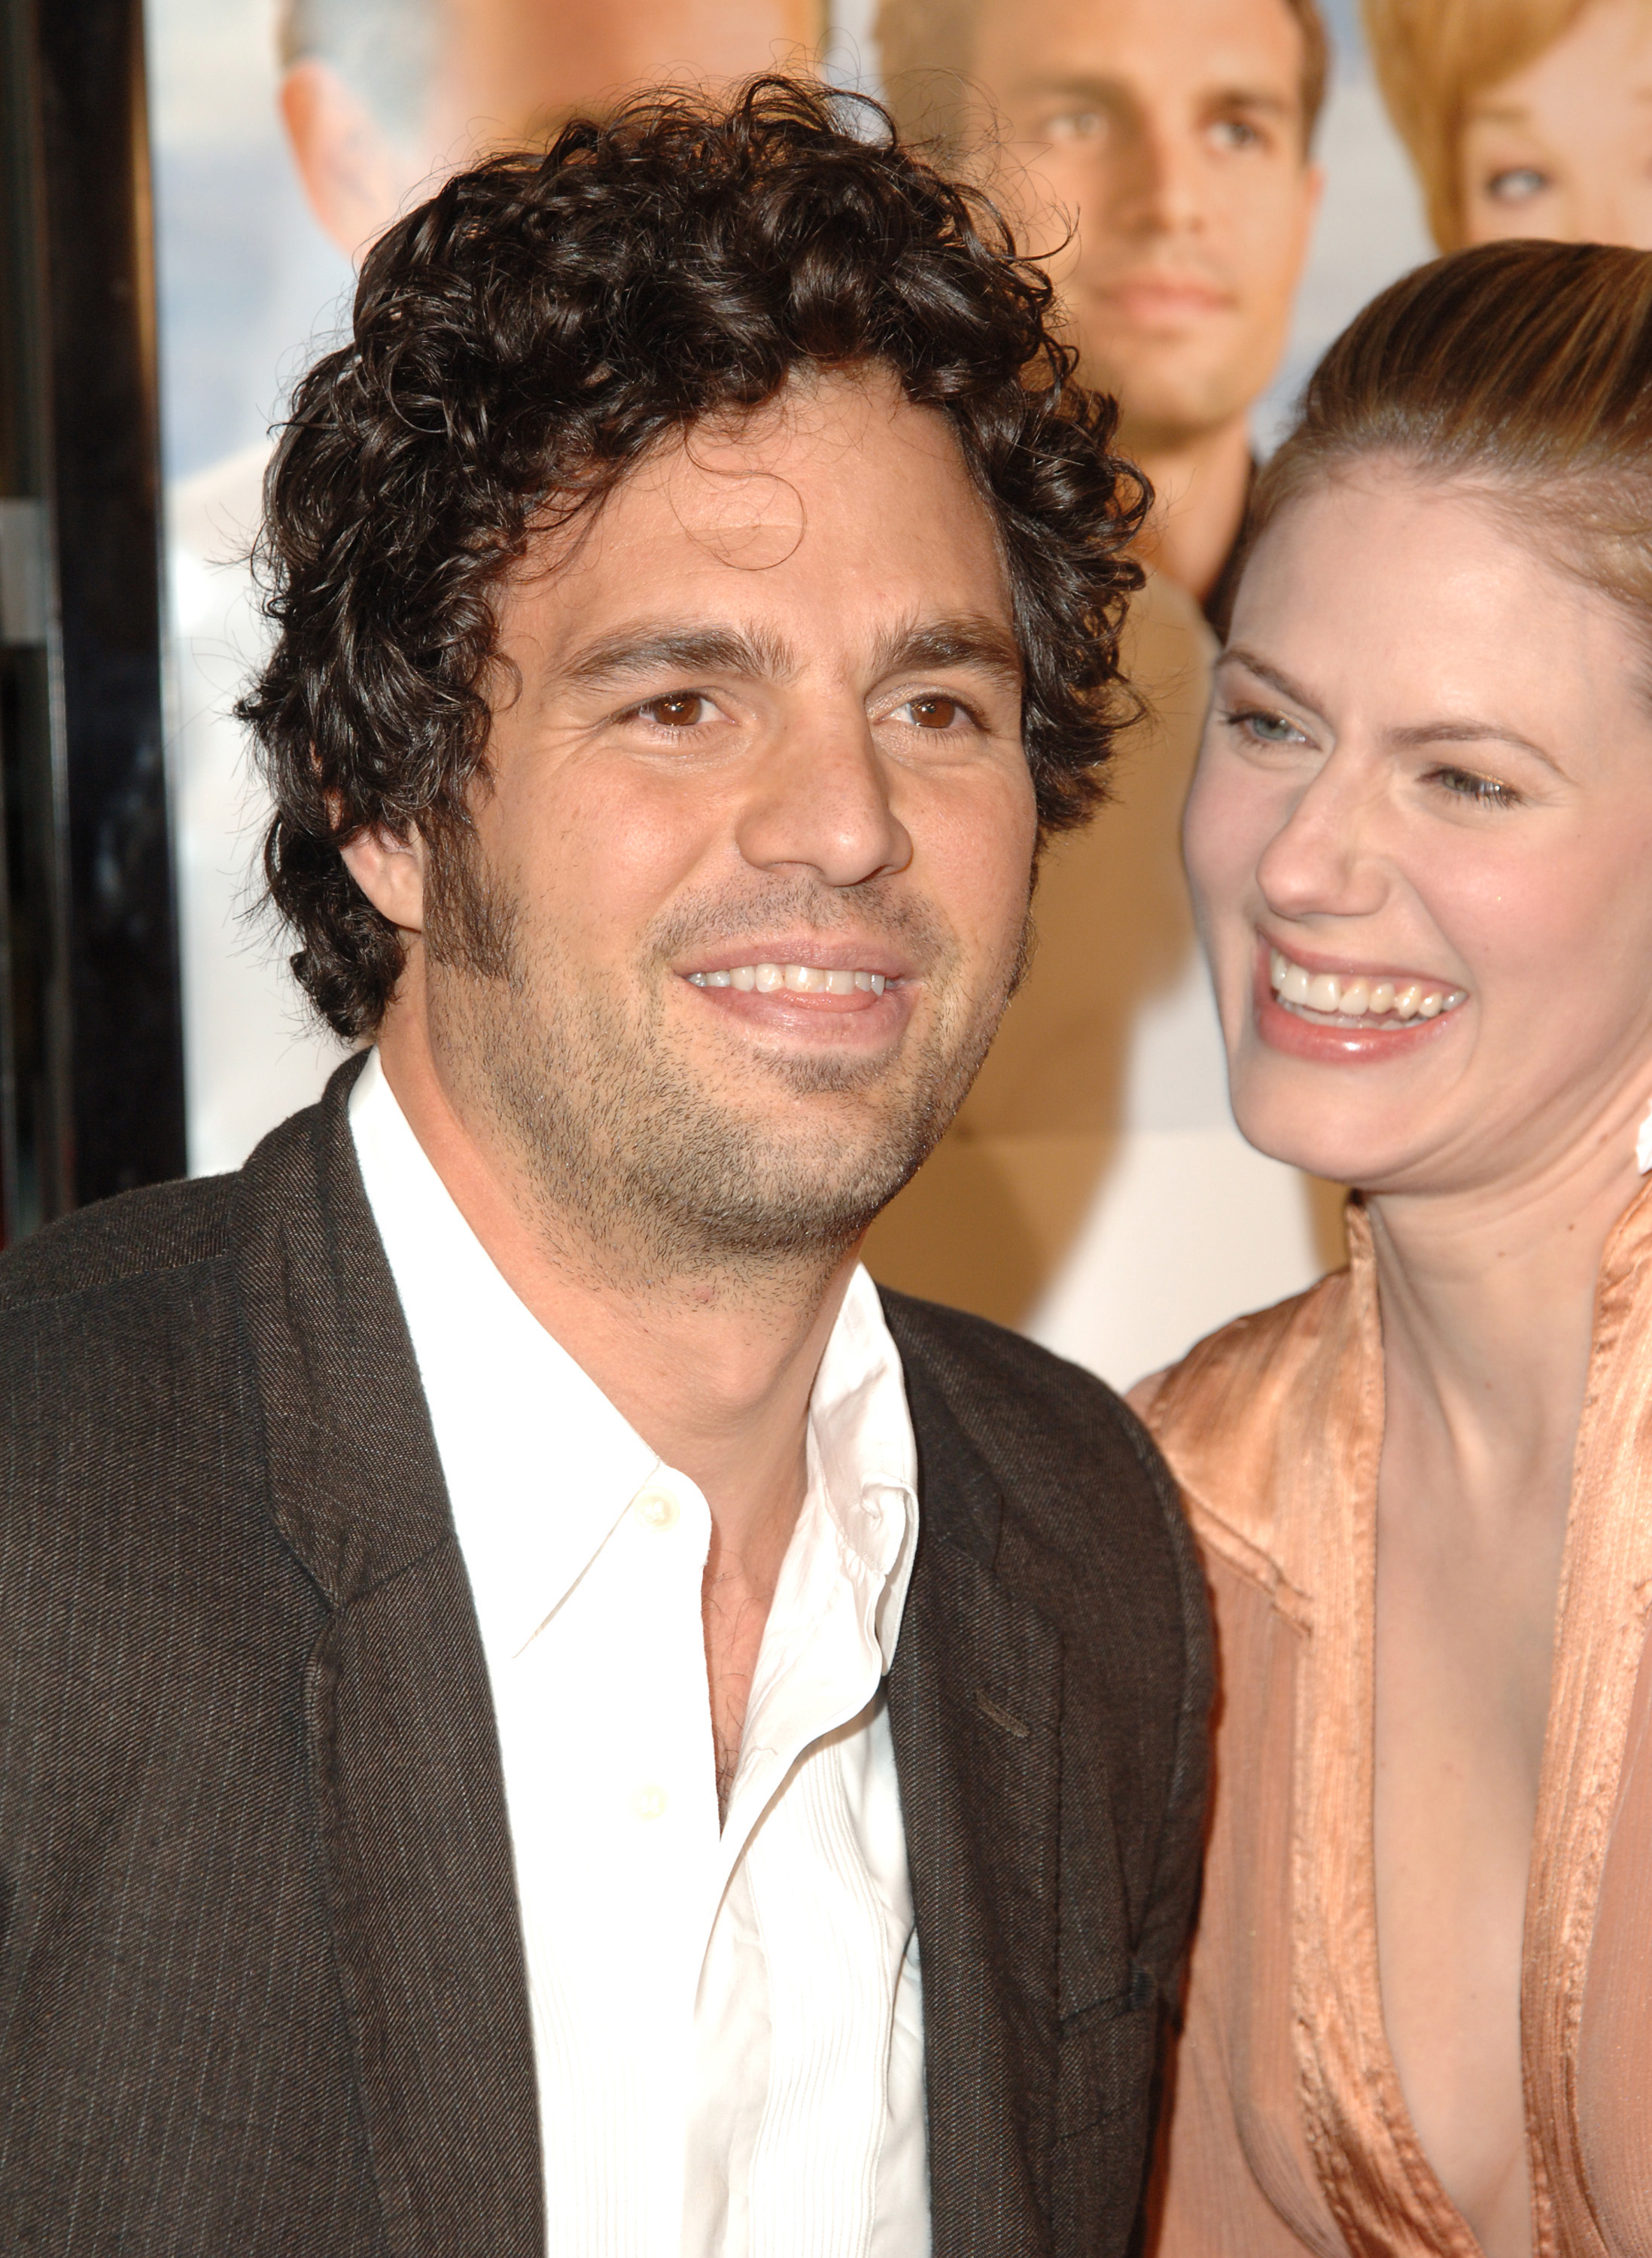 Mark and Sunrise Ruffalo at the premiere of "Rumor Has It" in Hollywood, California in 2005 | Source: Getty Images